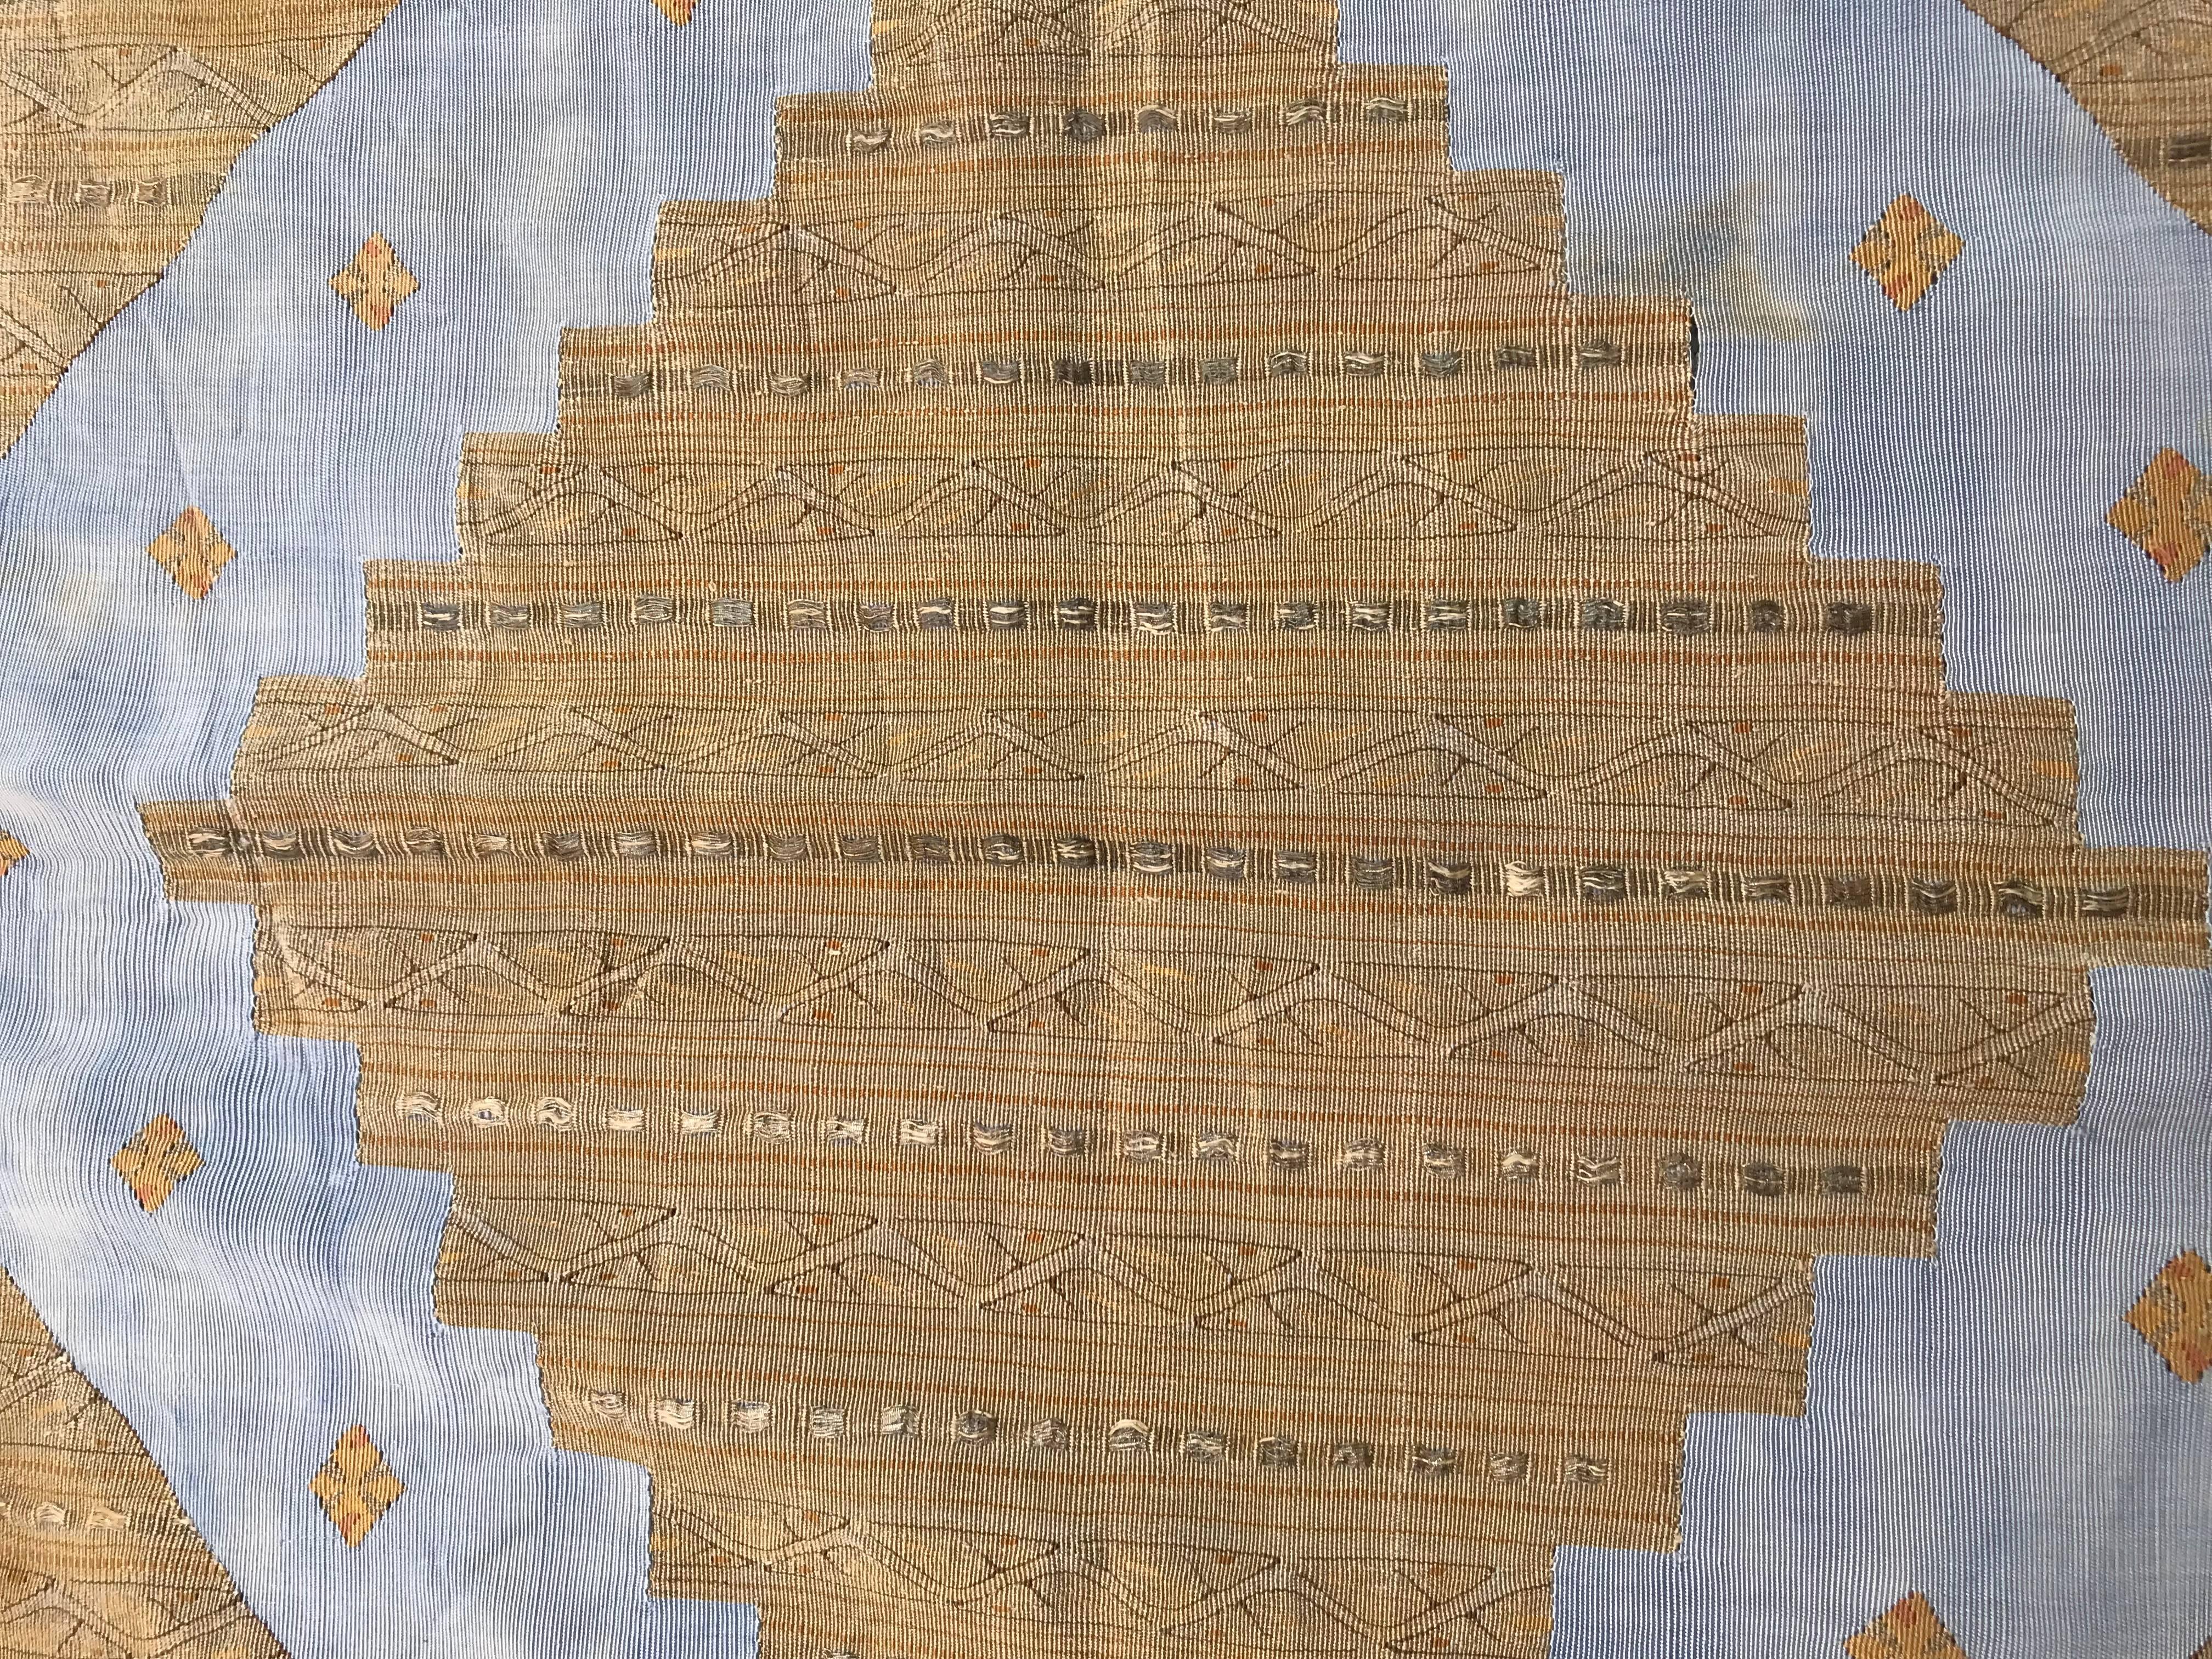 Hand-Woven Wonderful Antique Hand Weaving Silk Tapestry from Alep